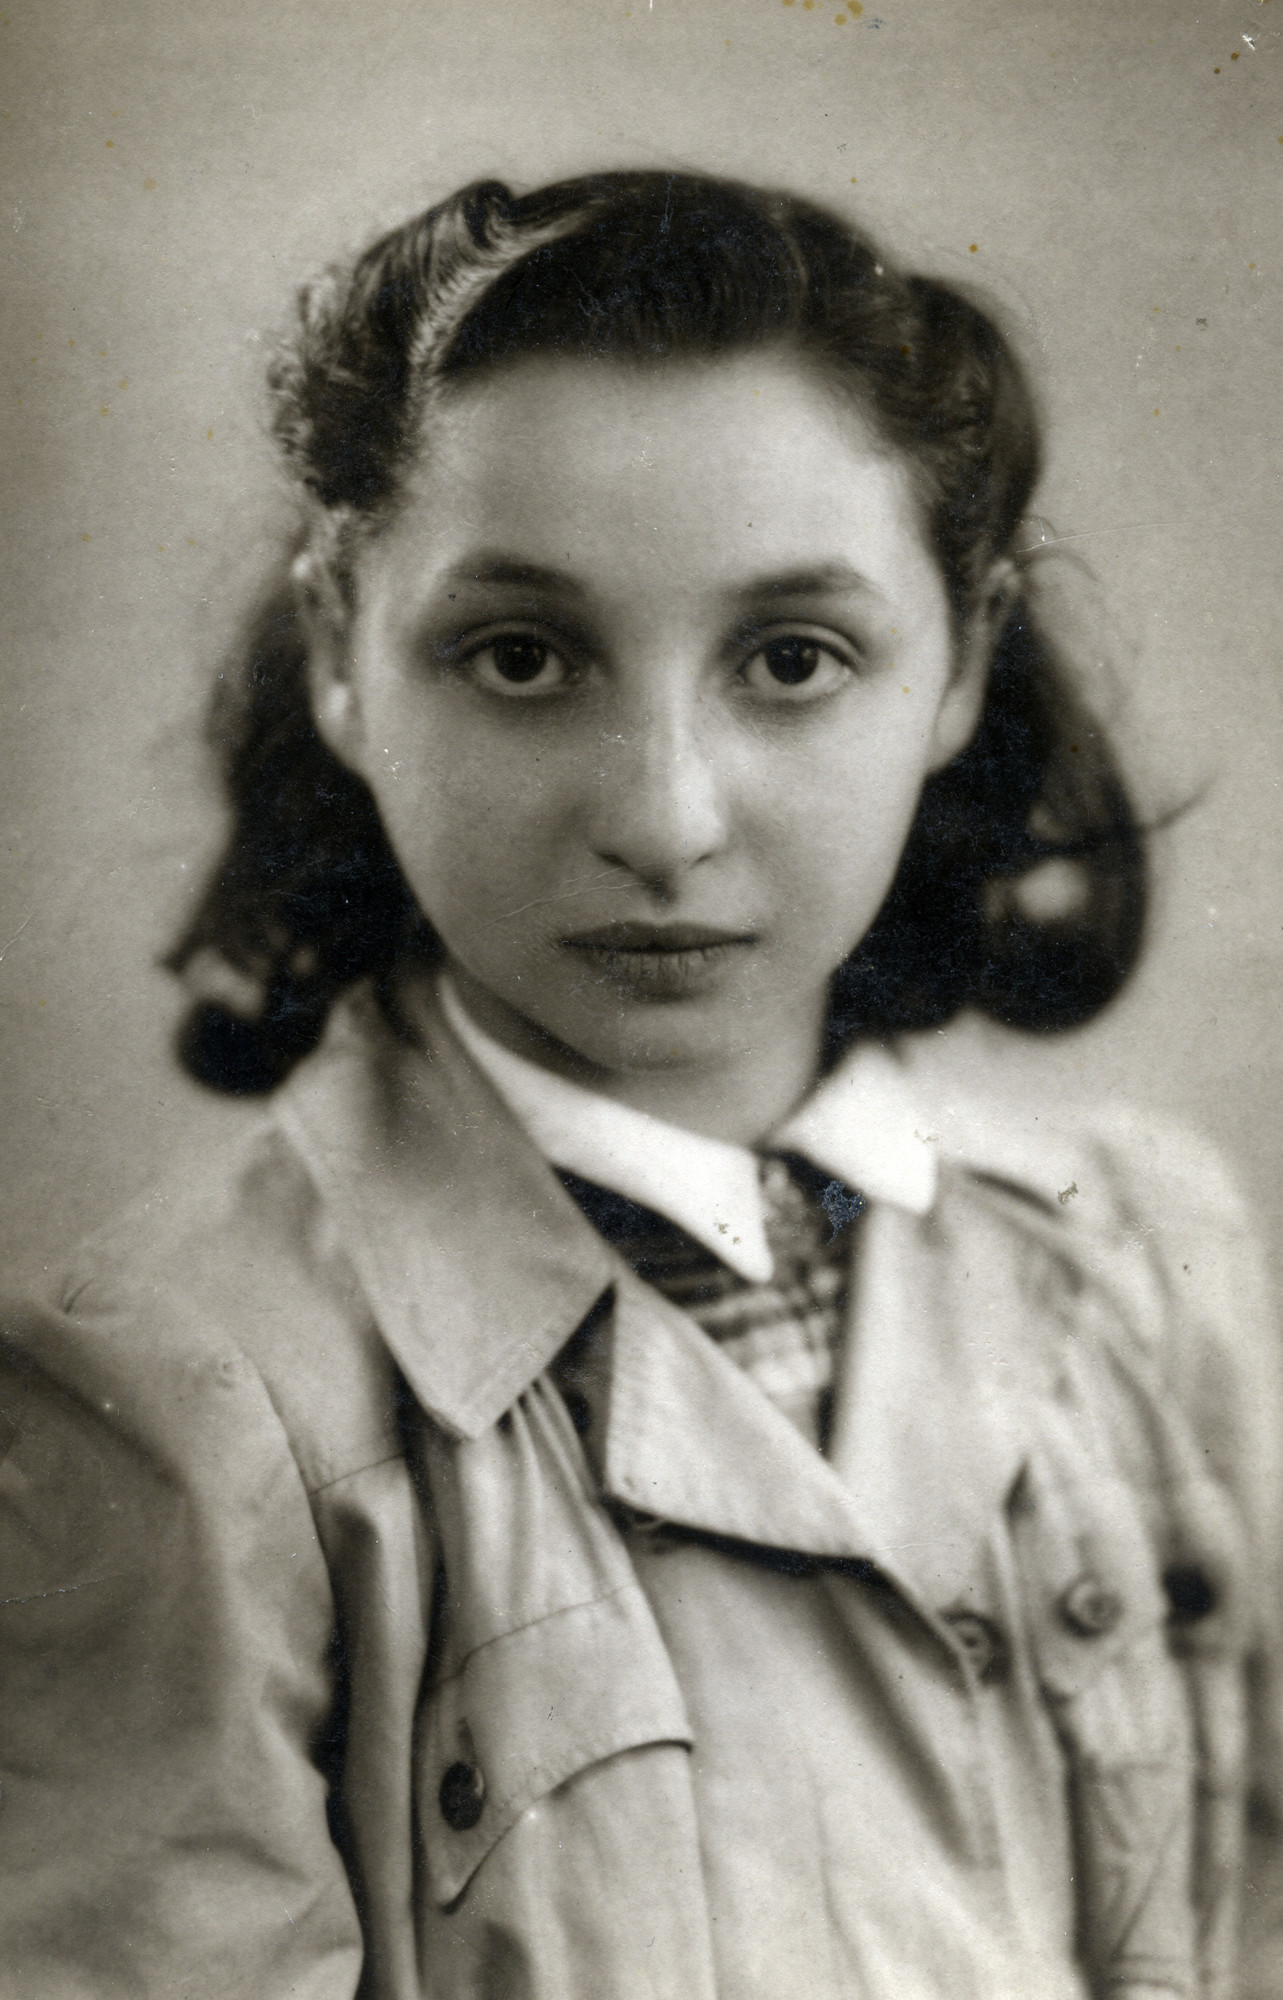 Portrait of a Dutch Jewish girl on her way to the home of the first familly who would provide her with a hiding place.

Pictured is Erna Stopper.